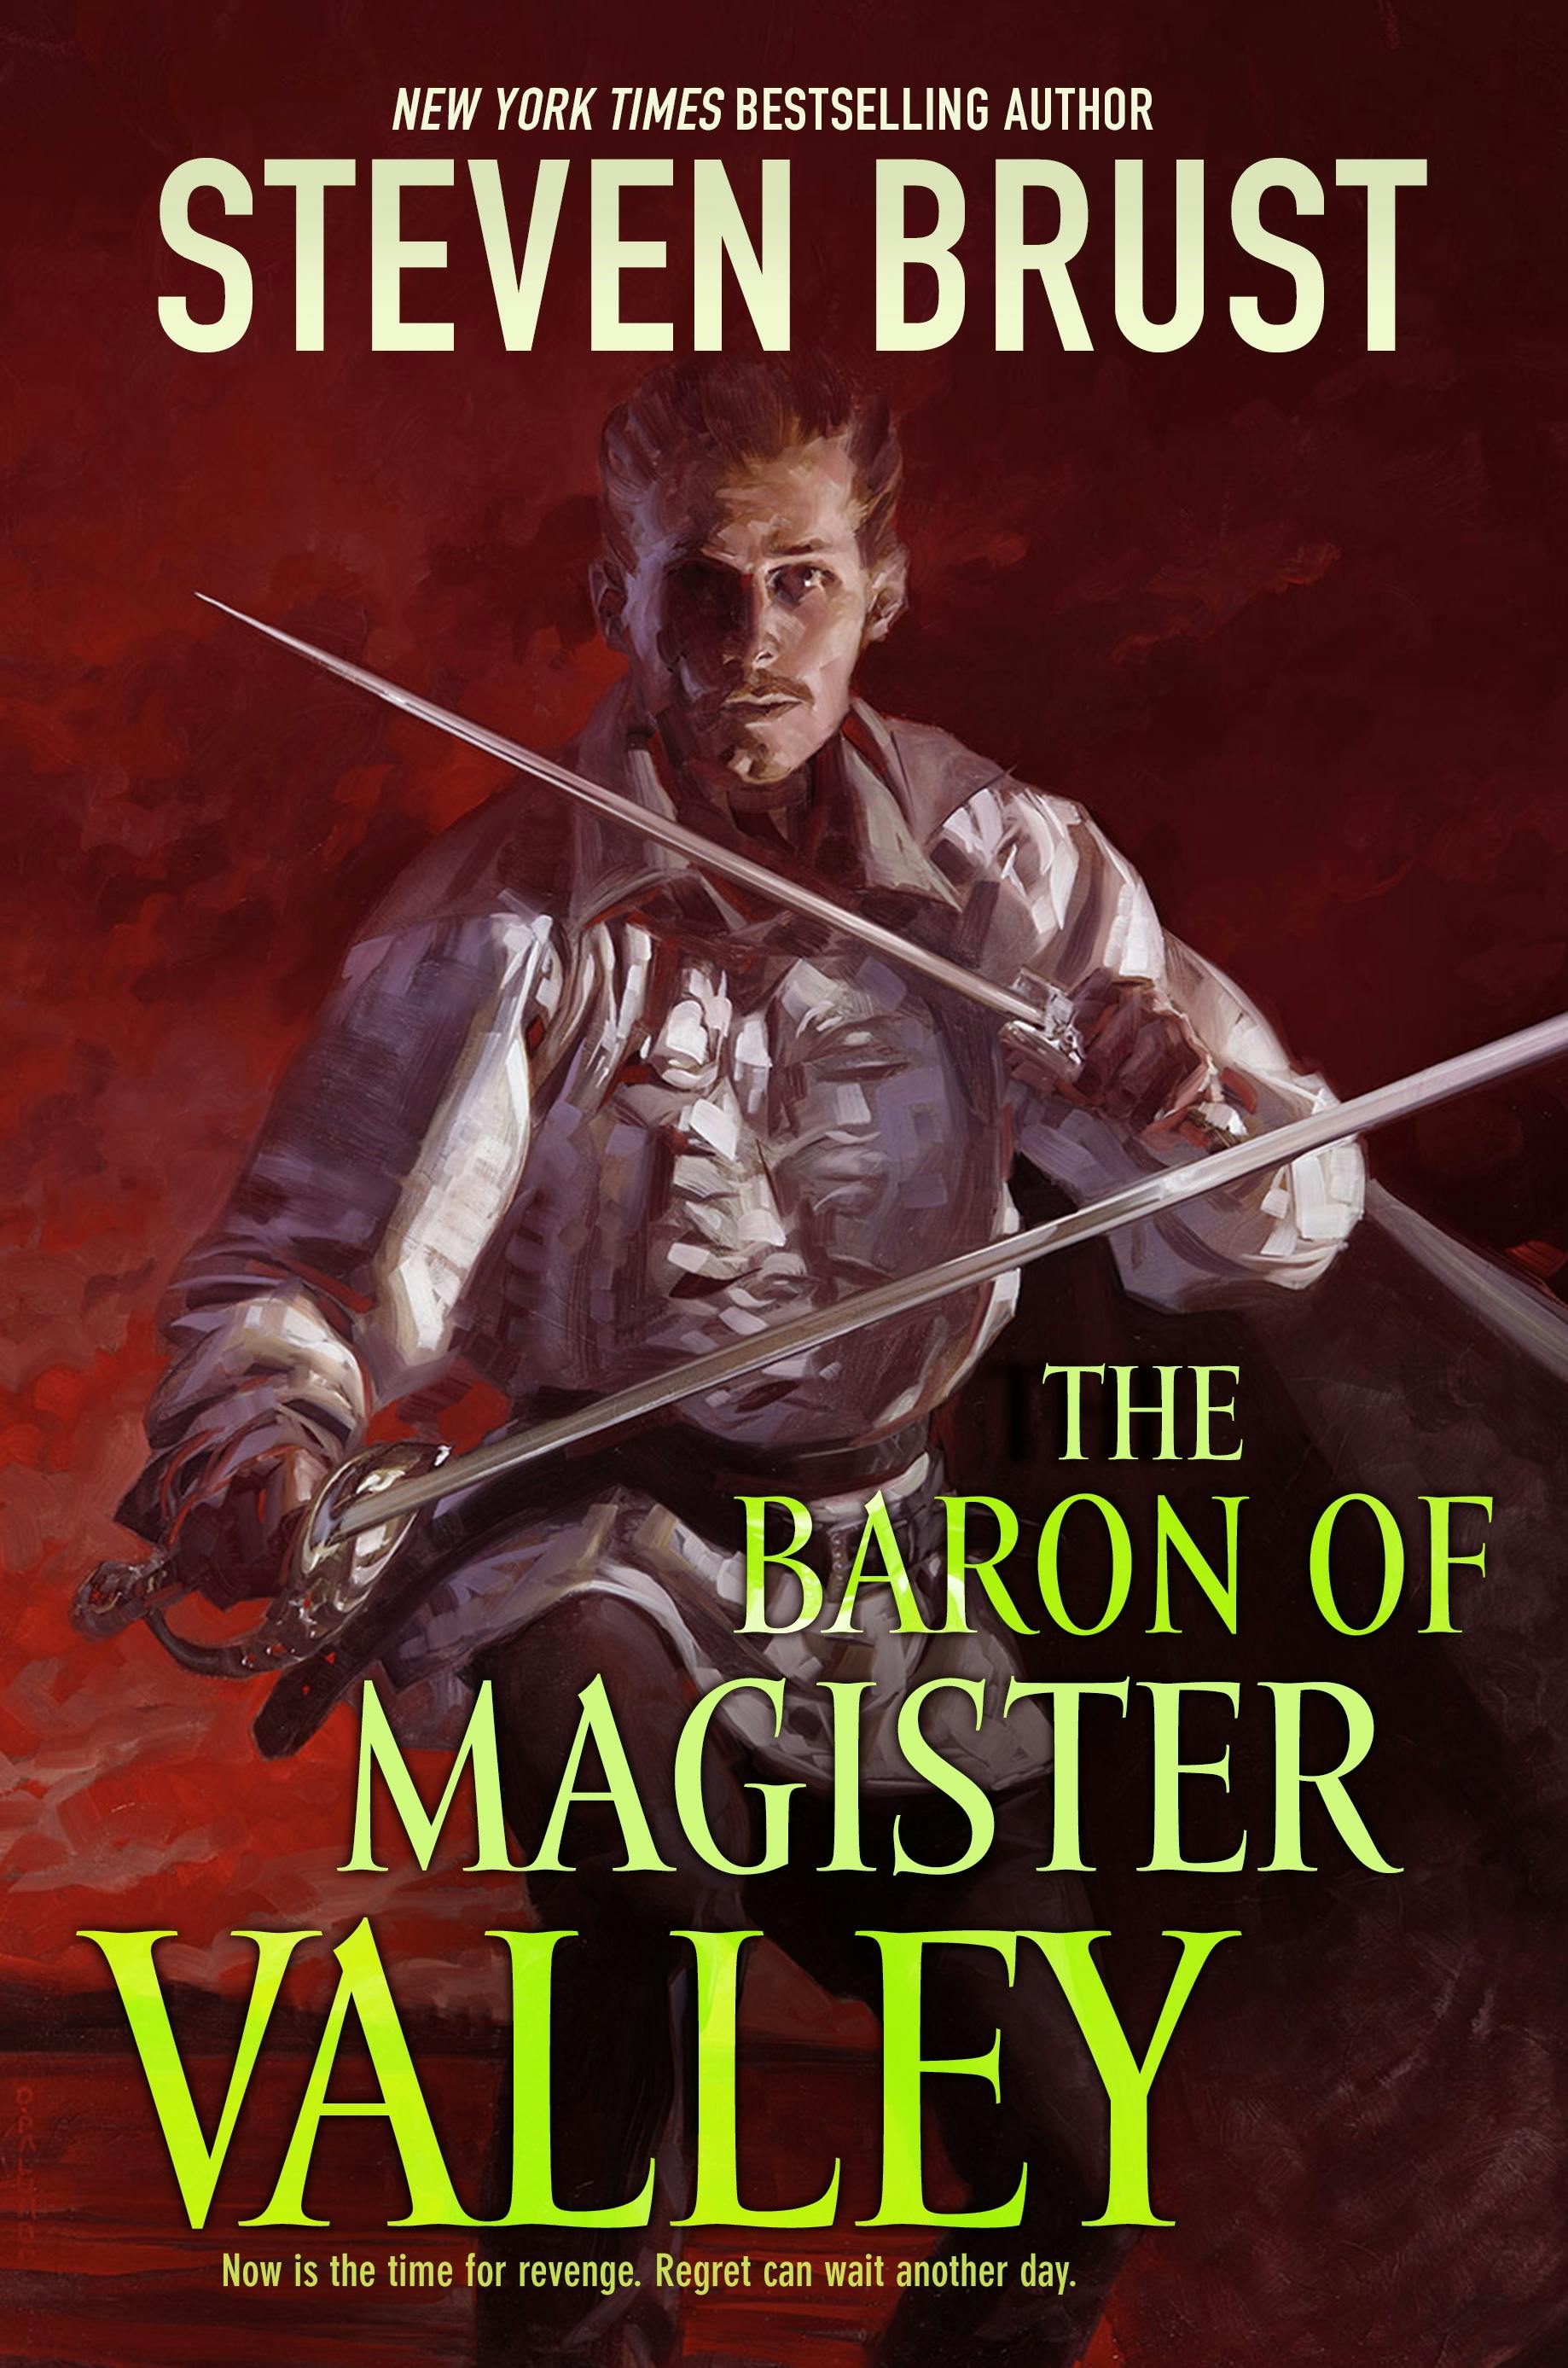 Image of The Baron of Magister Valley